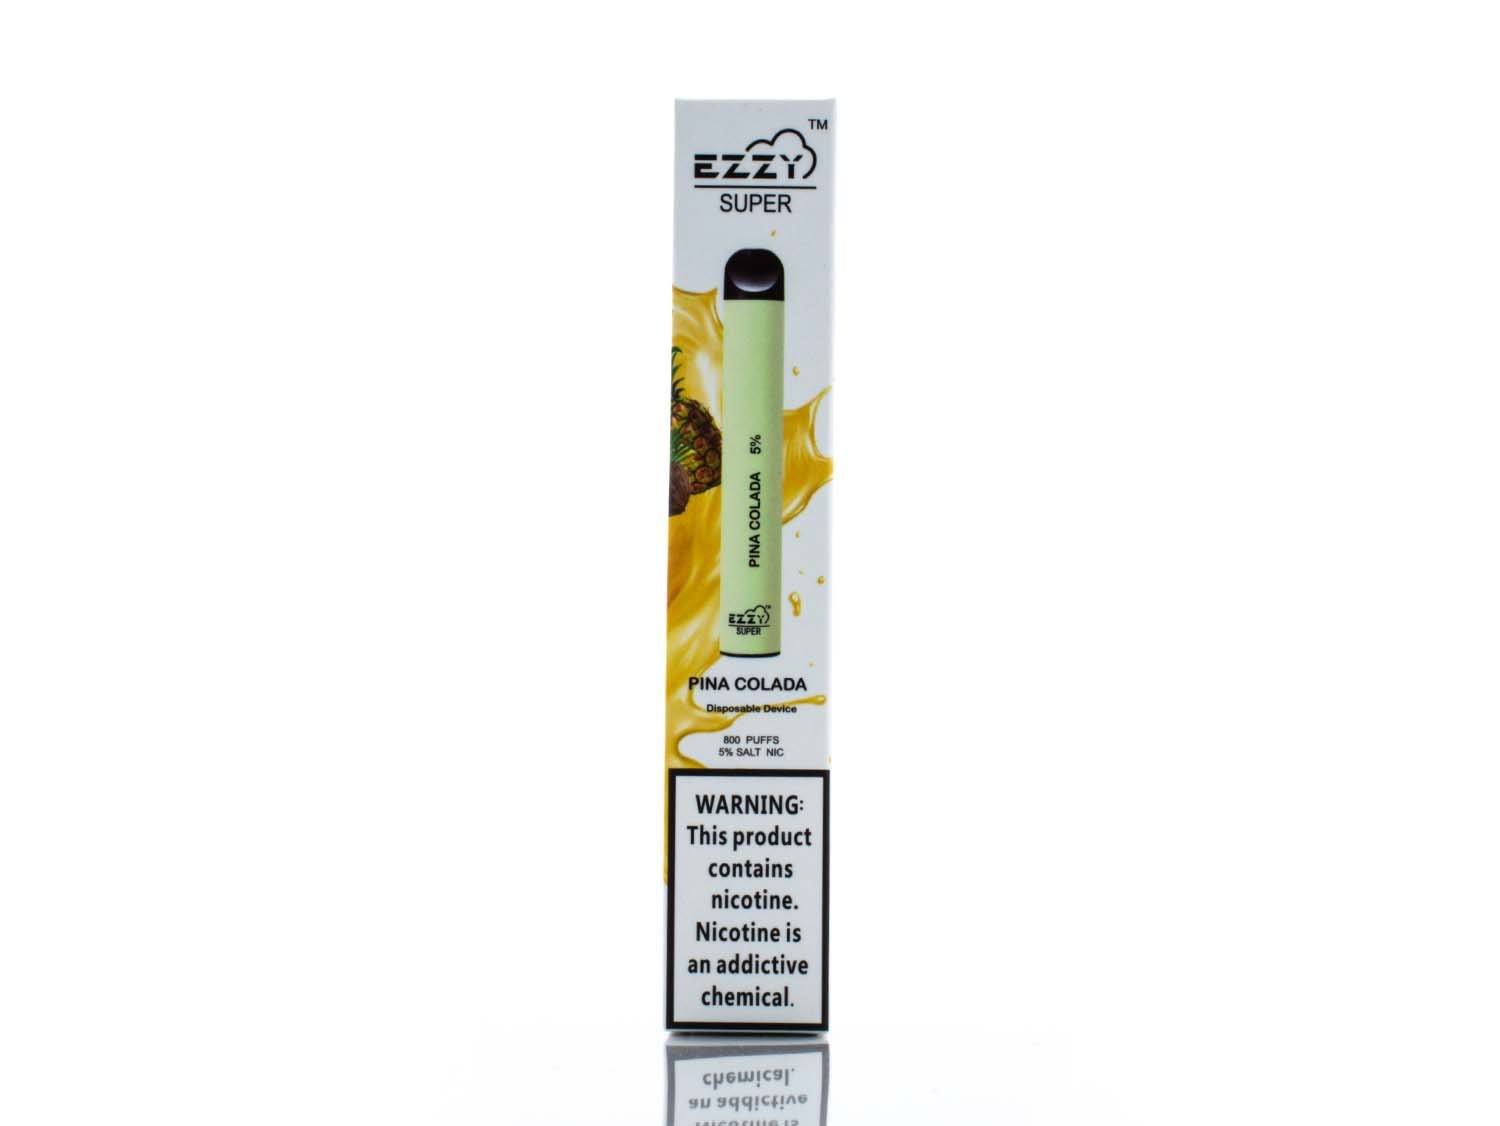 EZZY Super Disposable | 800 Puffs | 3.2mL Pins Colada Packaging